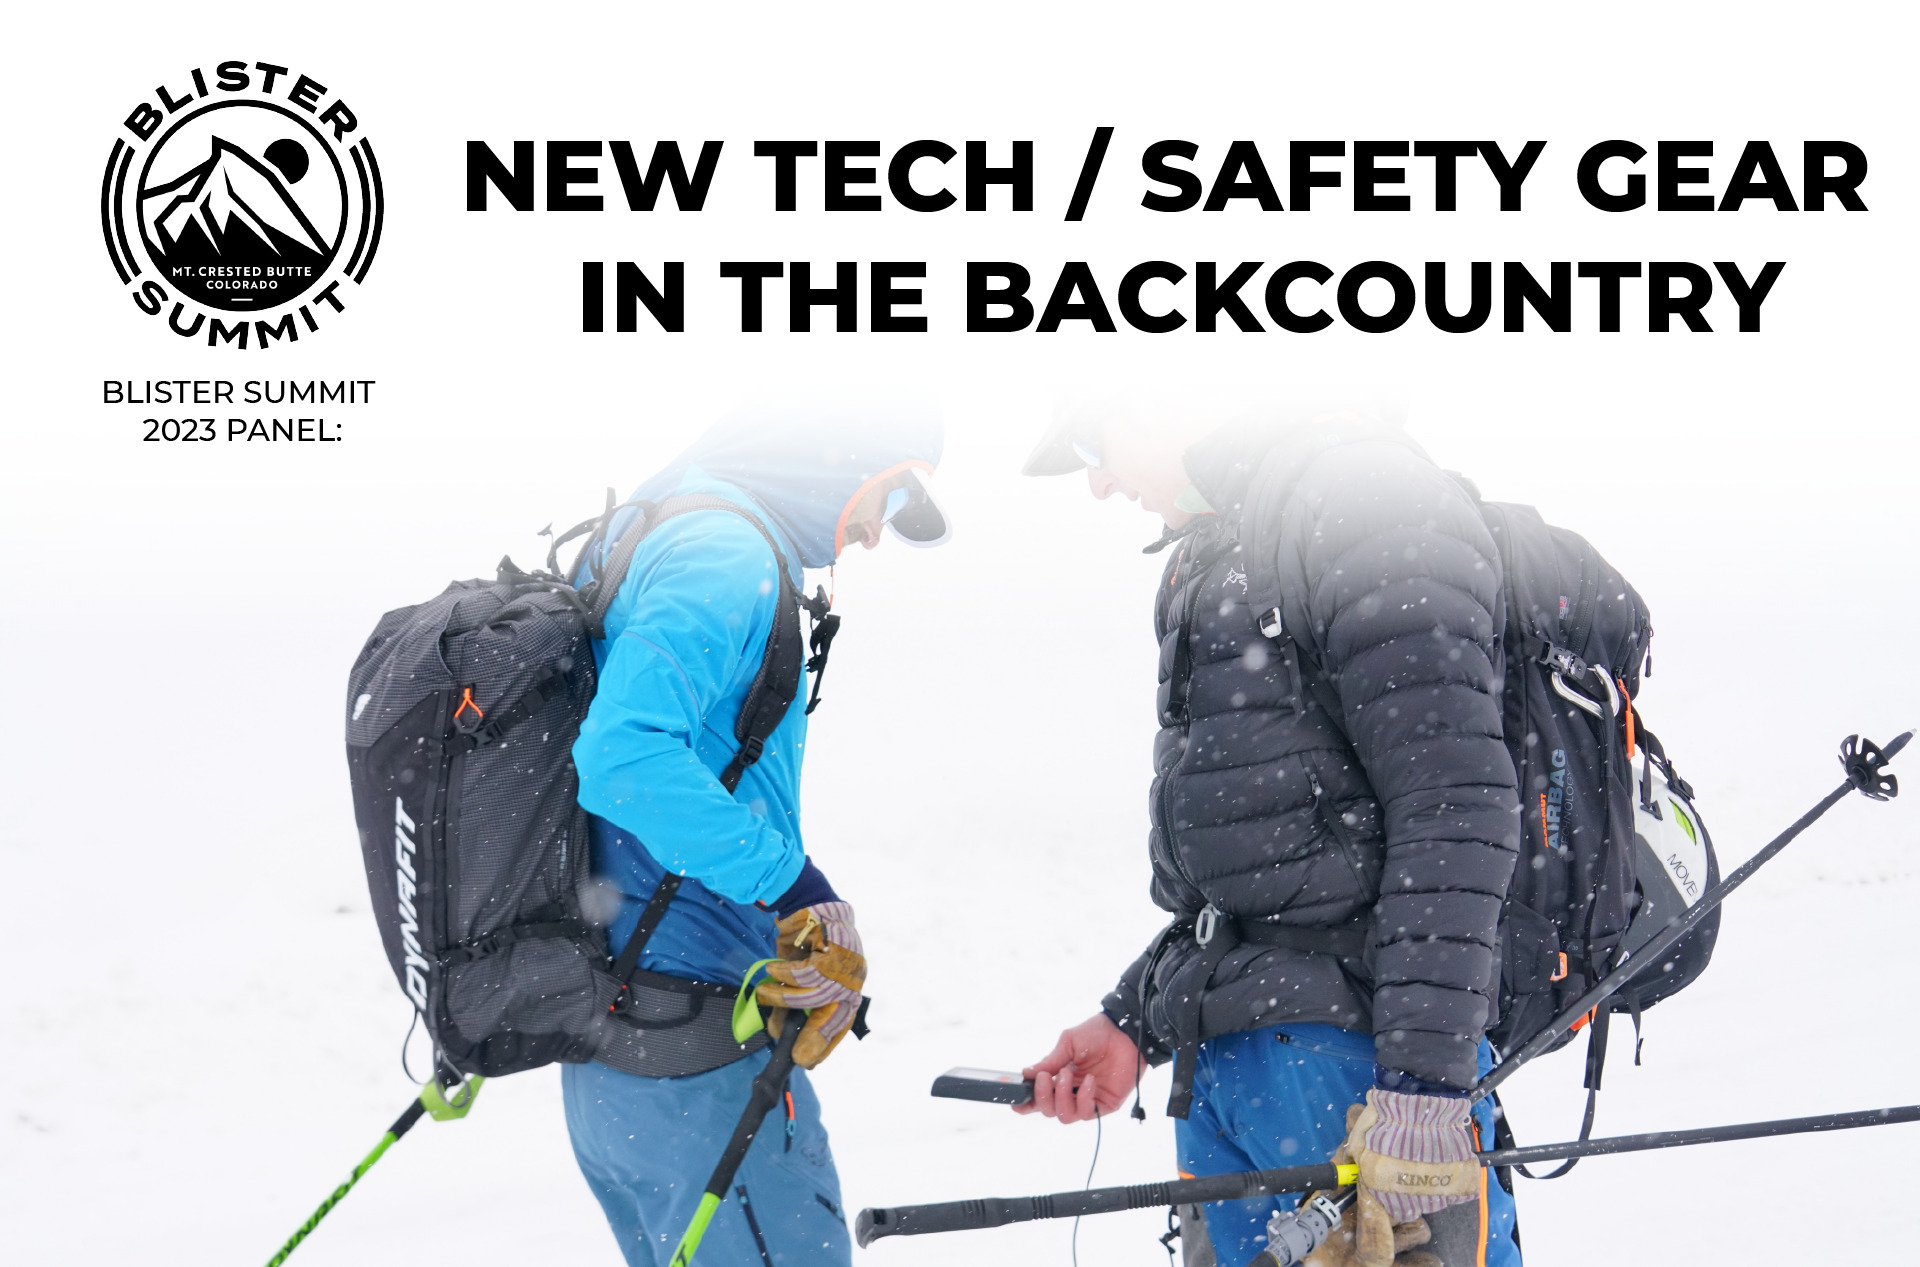 Backcountry Safety & Backcountry Safety Equipment